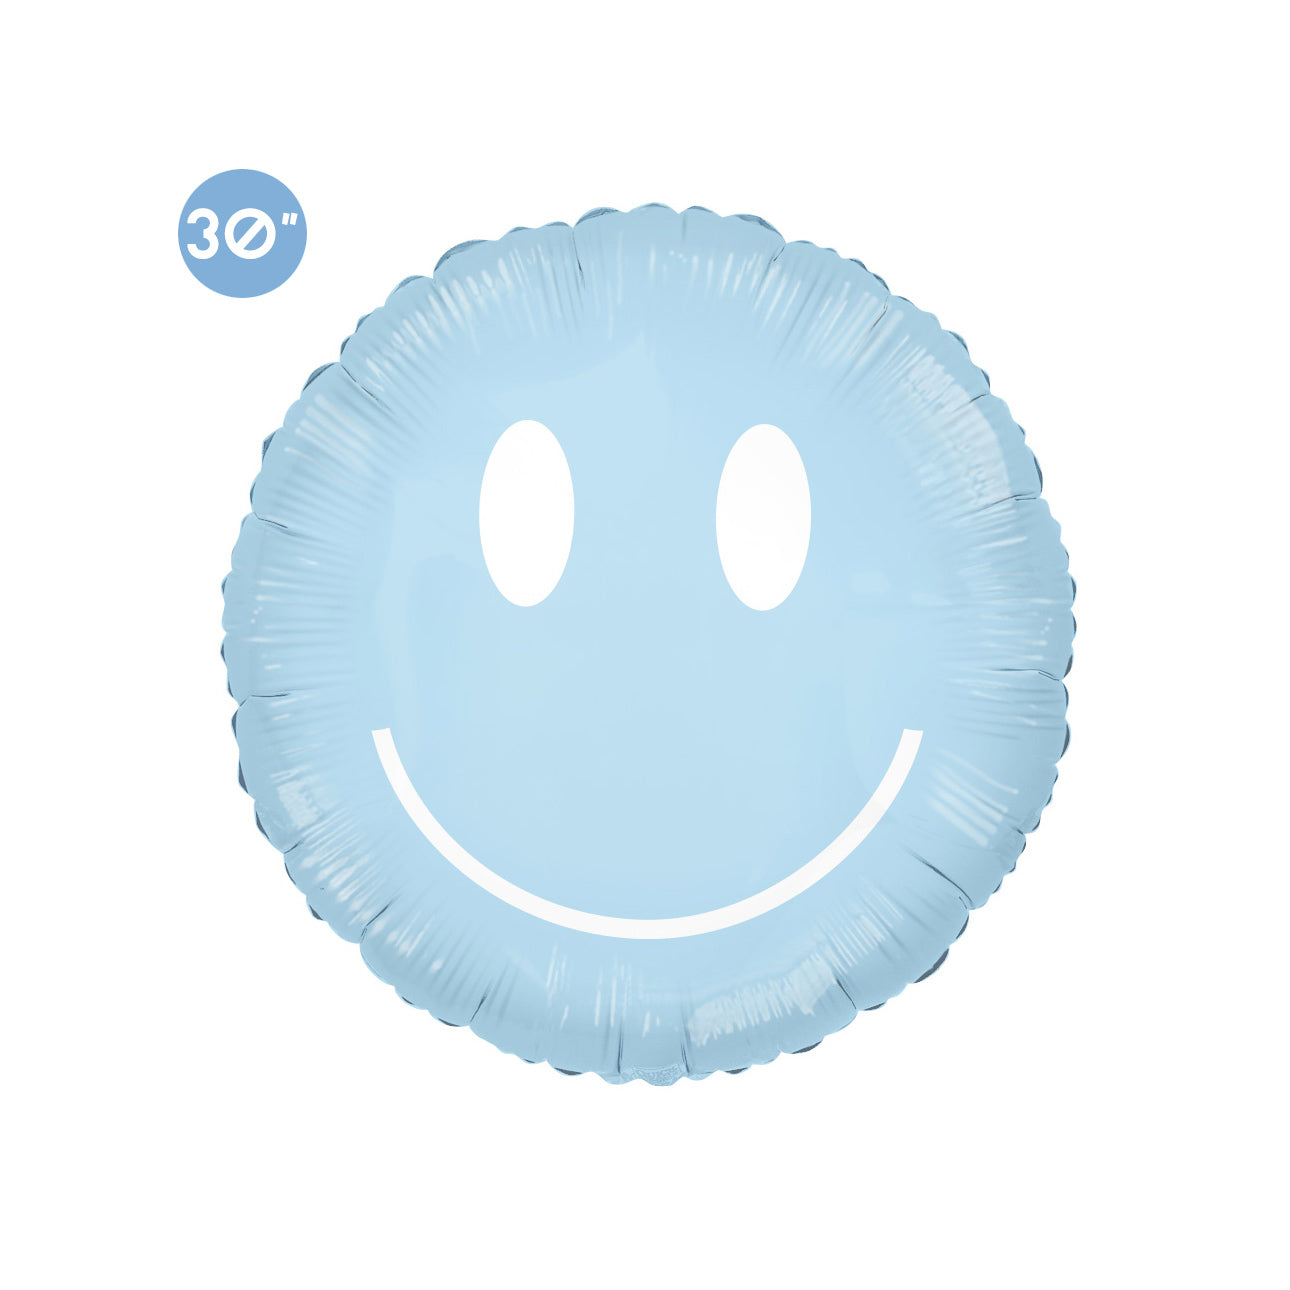 Pale Blue Groovy Smiley Face Foil Balloon 30" - Retro Funky Hippie Party Decor